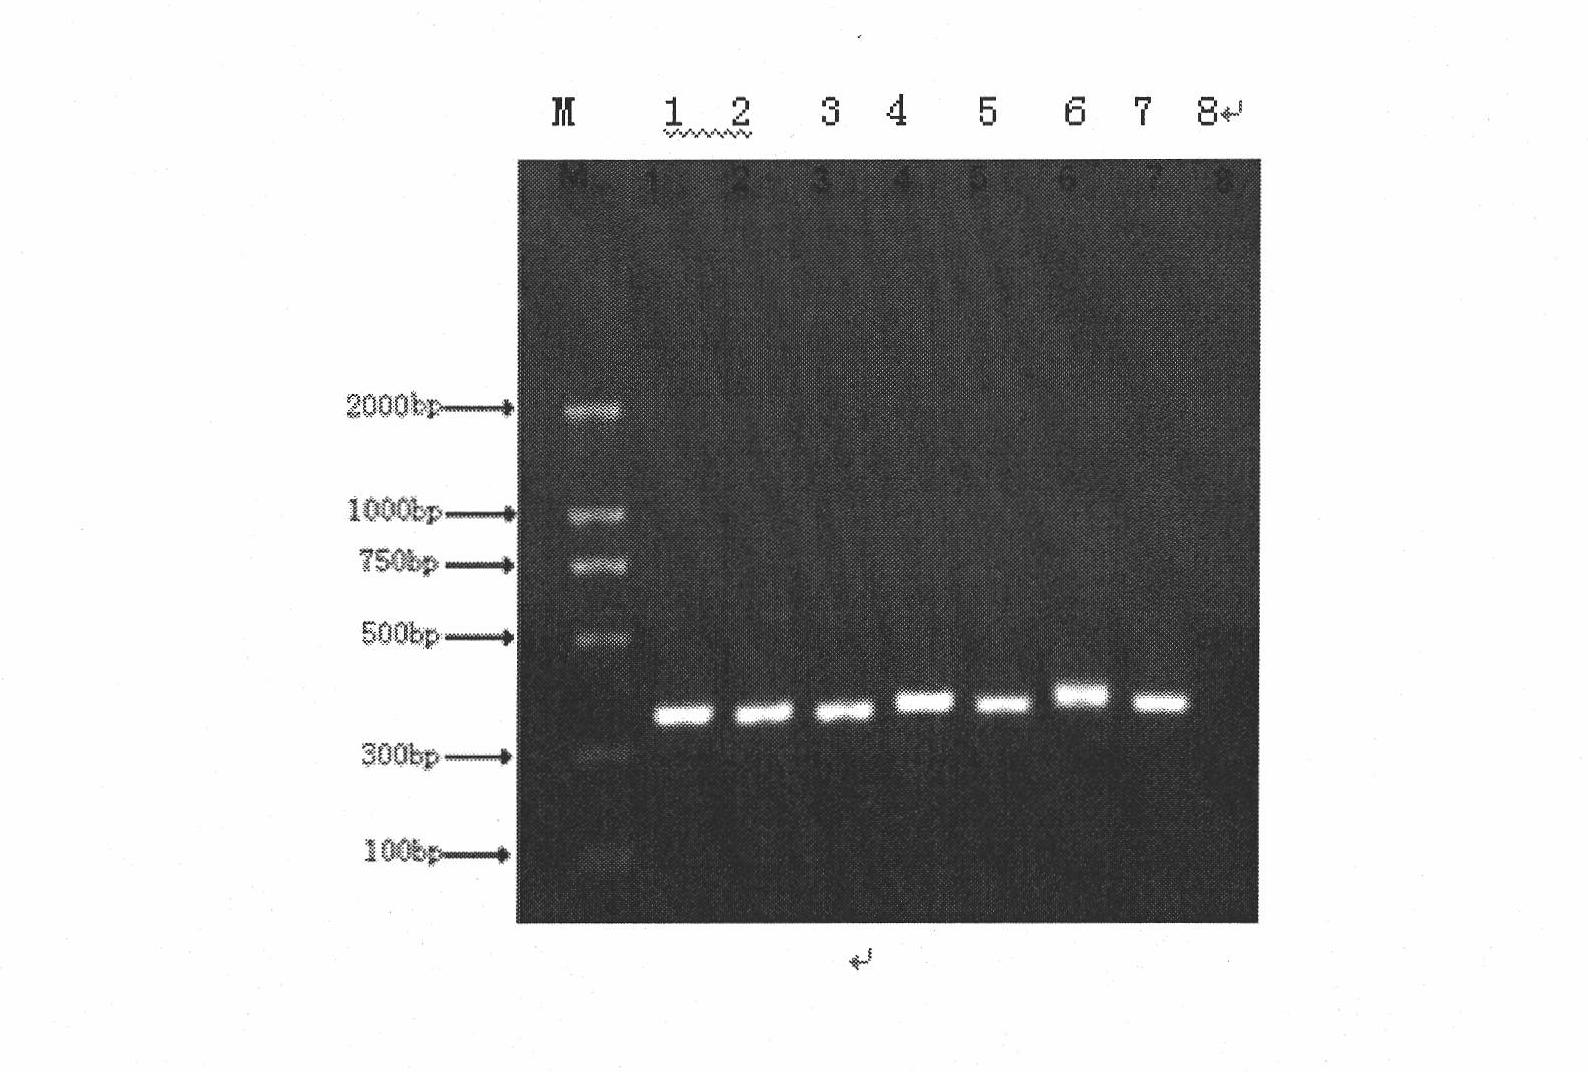 Rapid detection method of blood pathogenic bacteria based on CE-SSCP (Capillary Electrophoresis-Single Strand Conformation Polymorphism)